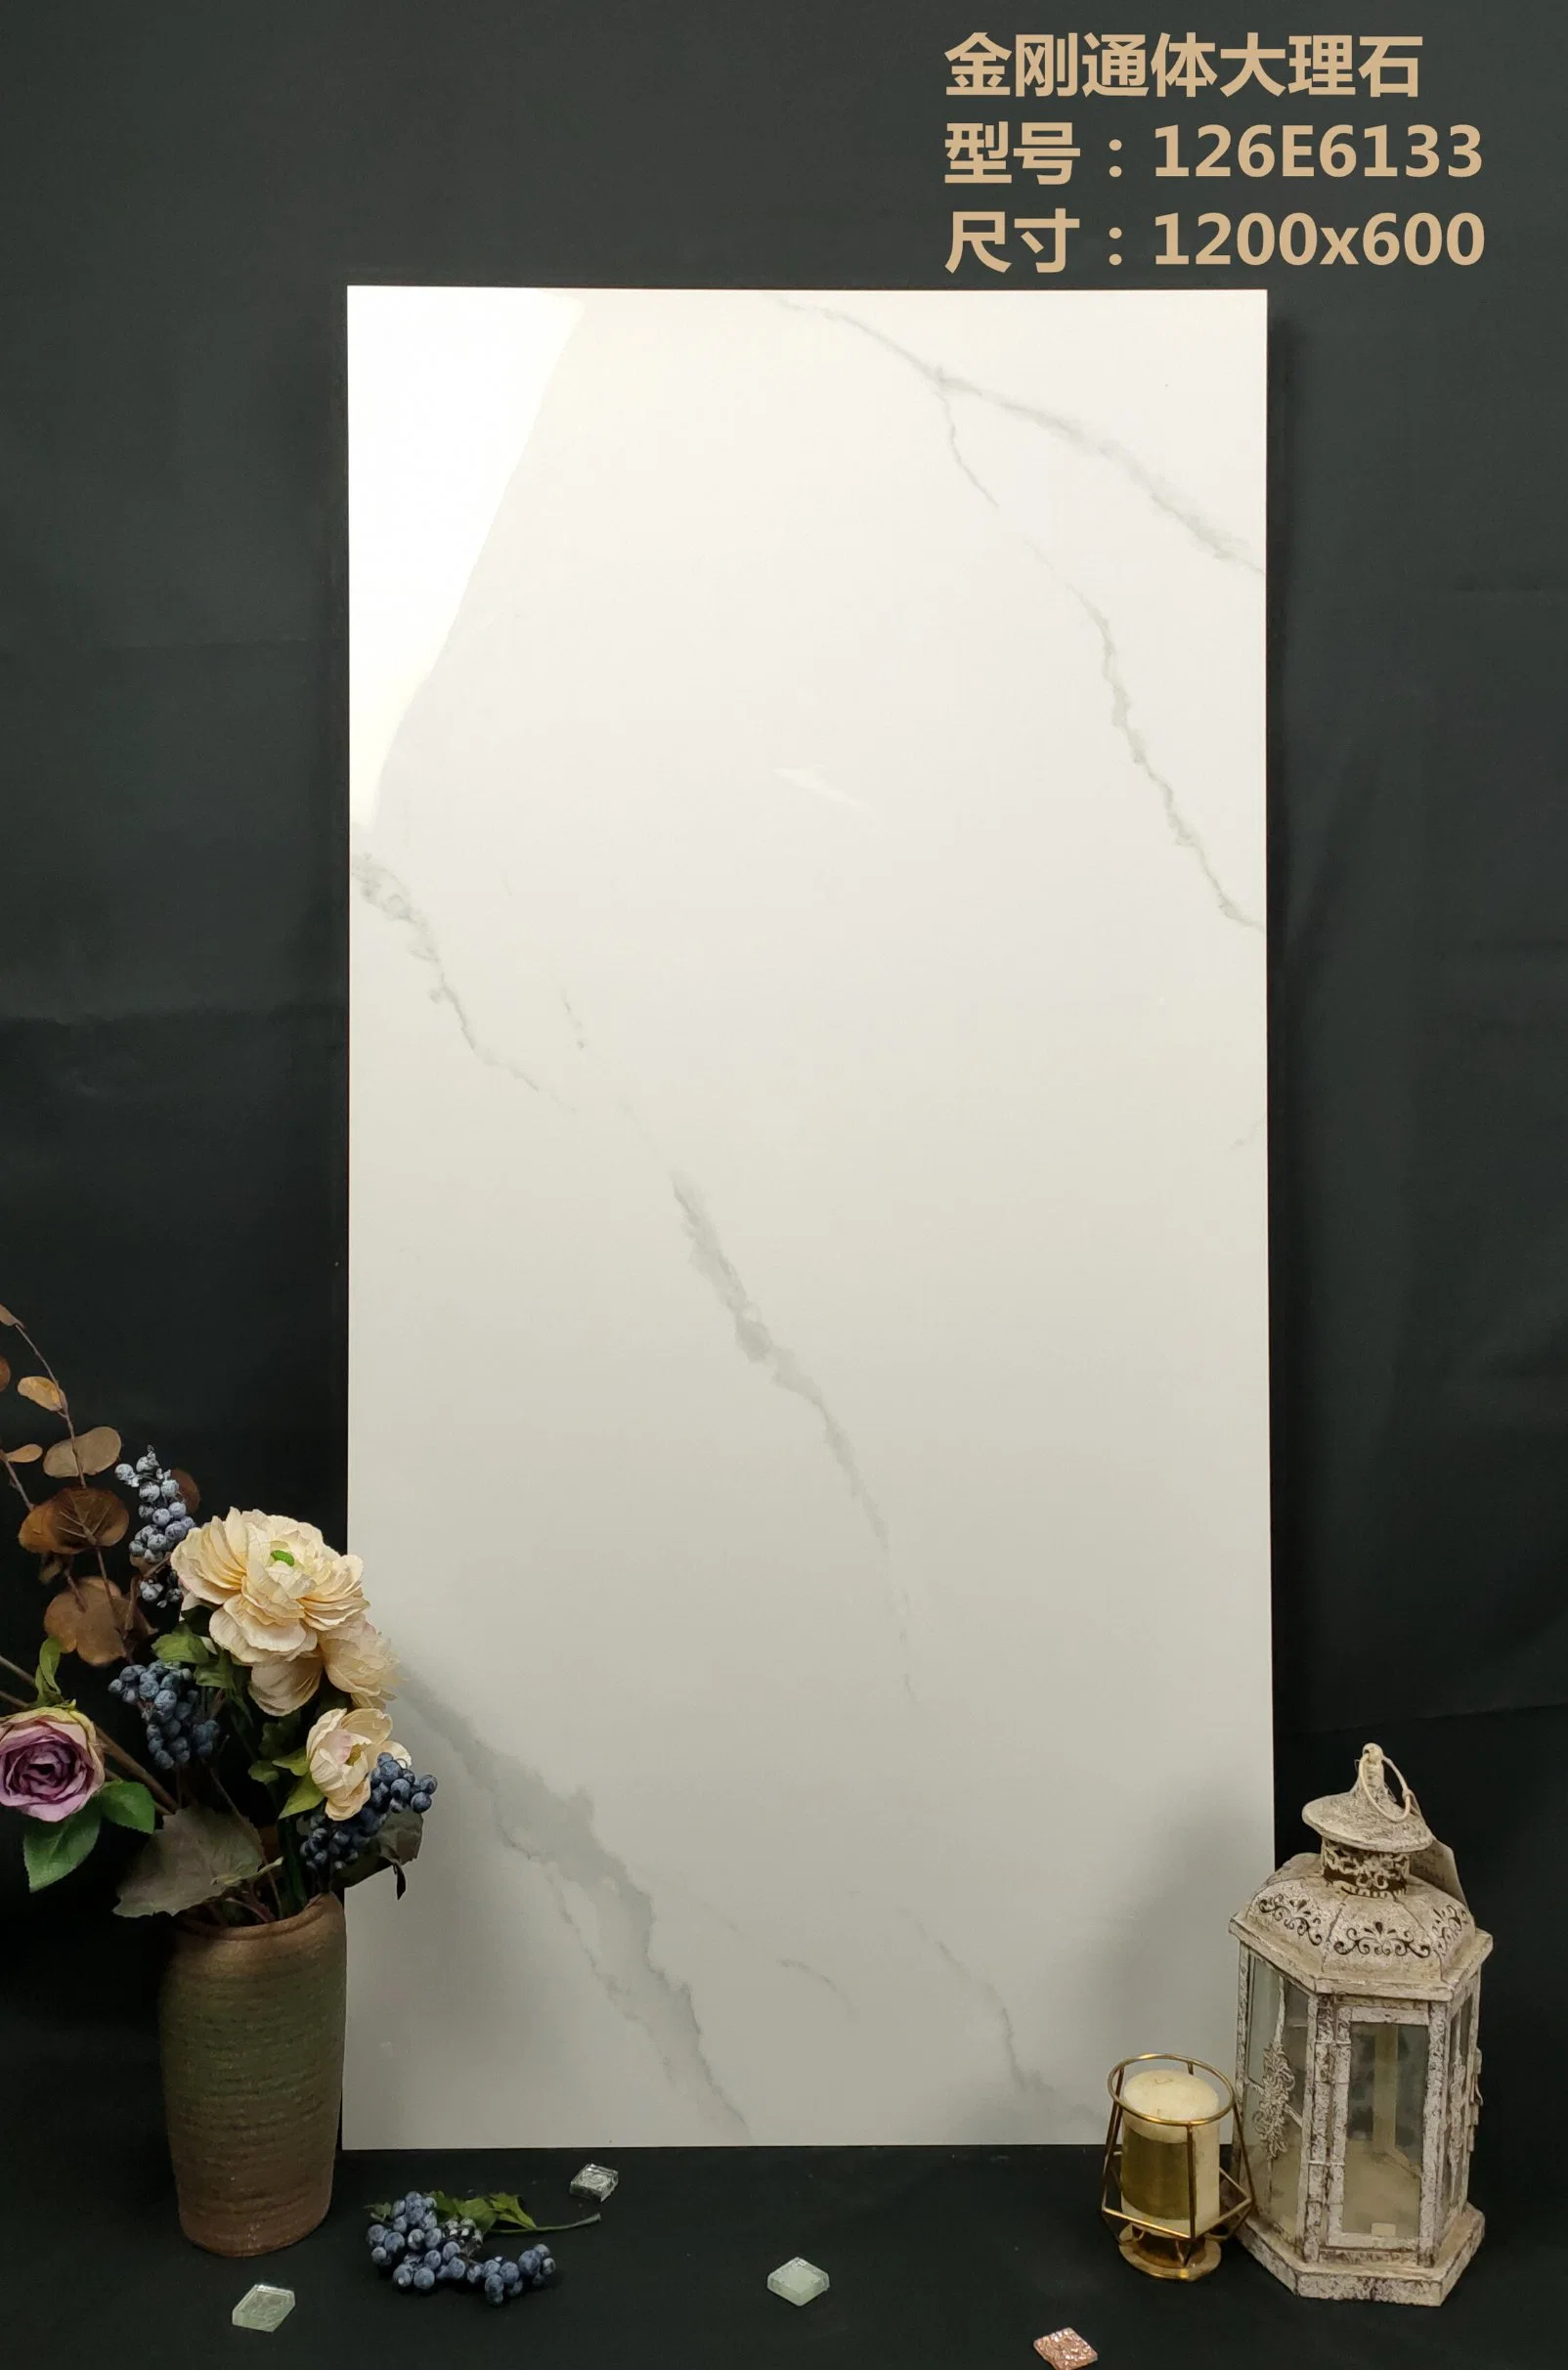 Chinese White Marble Tile Full Size 60X120 Porcelain Floor and Wall Tile